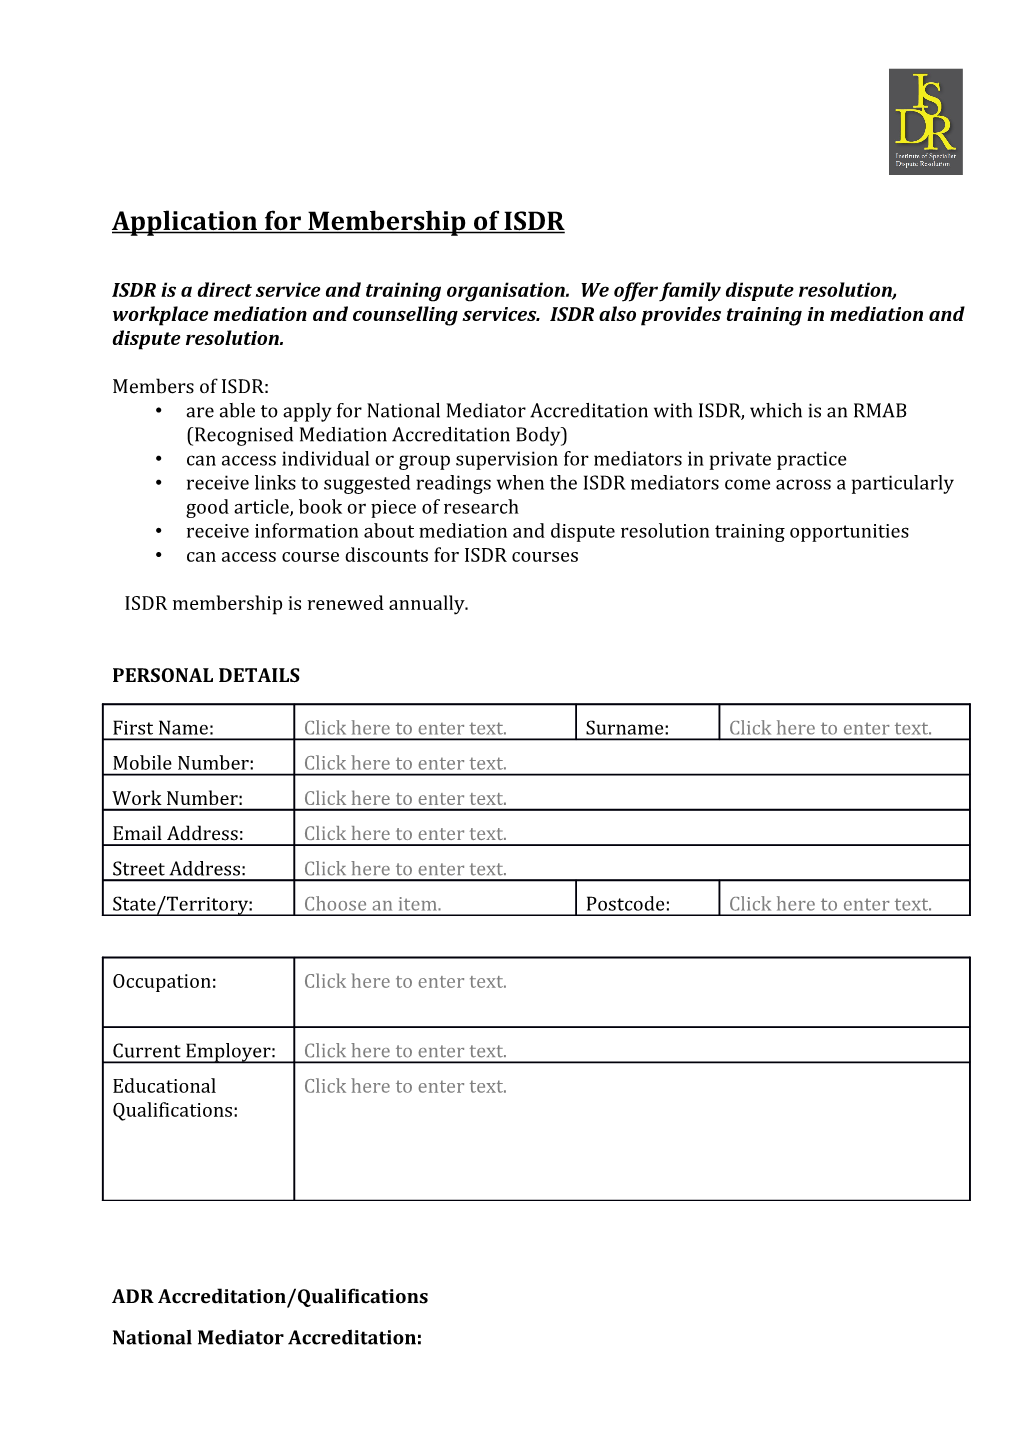 Application for Membership of ISDR